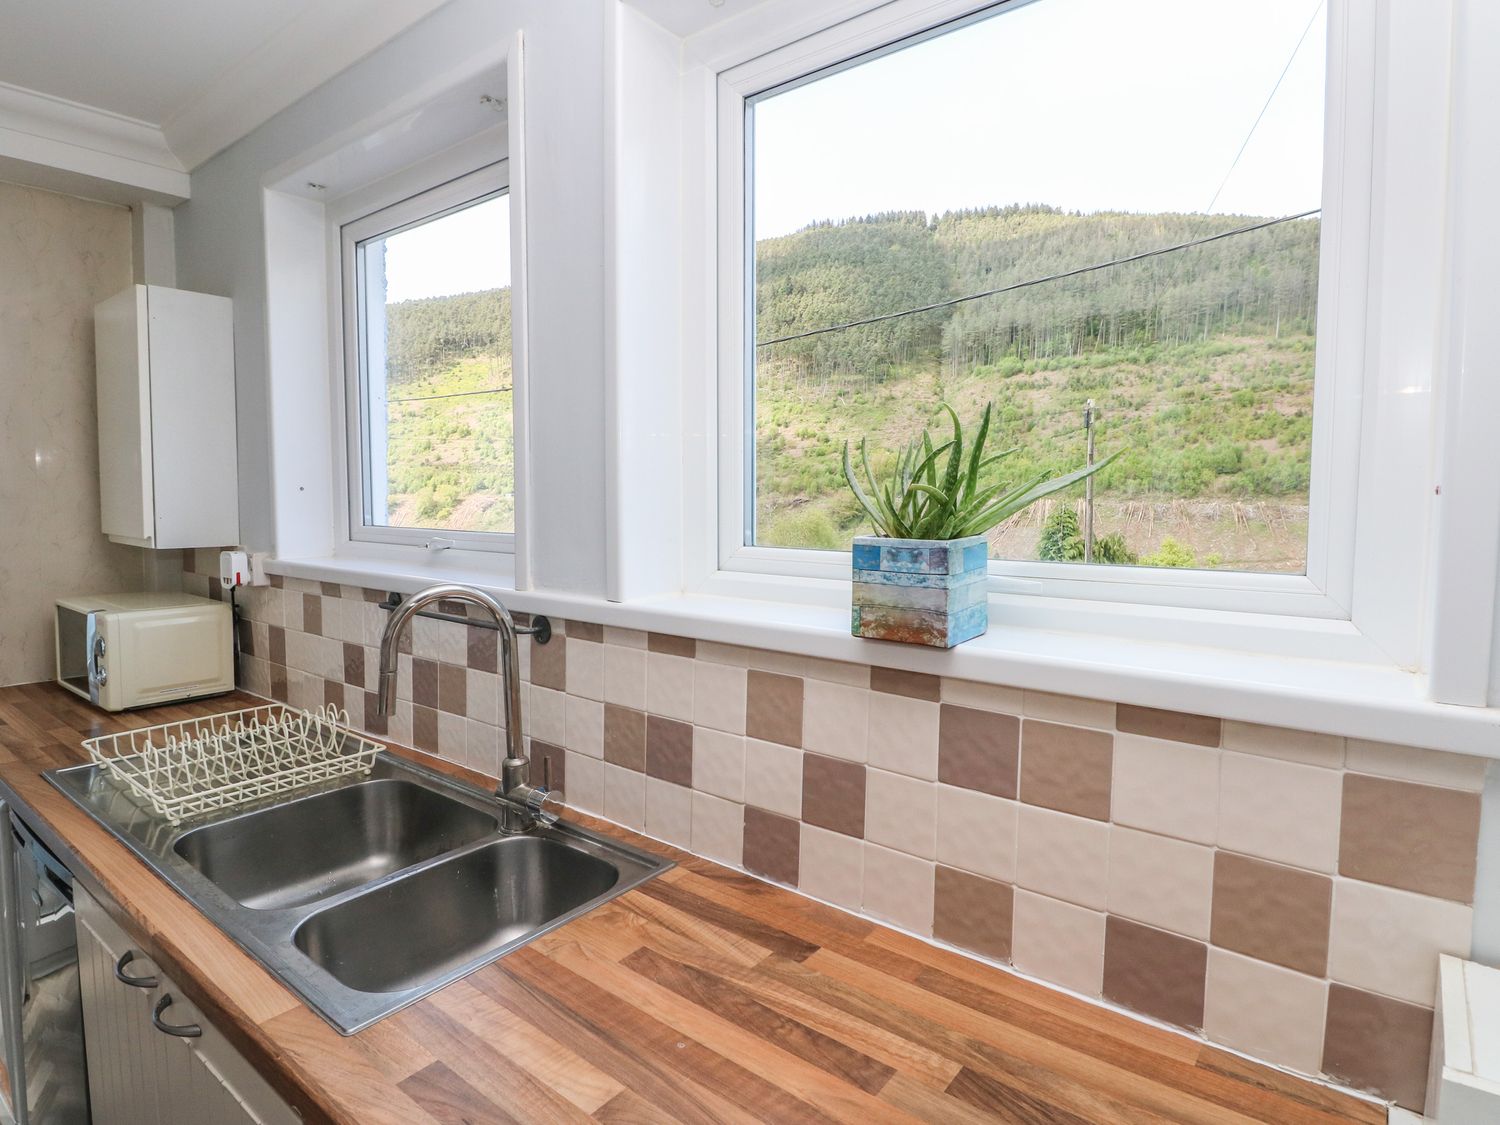 Afan House nr Pontrhydyfen, West Glamorgan. Three-bedroom home with woodburning stove. Pet-friendly.